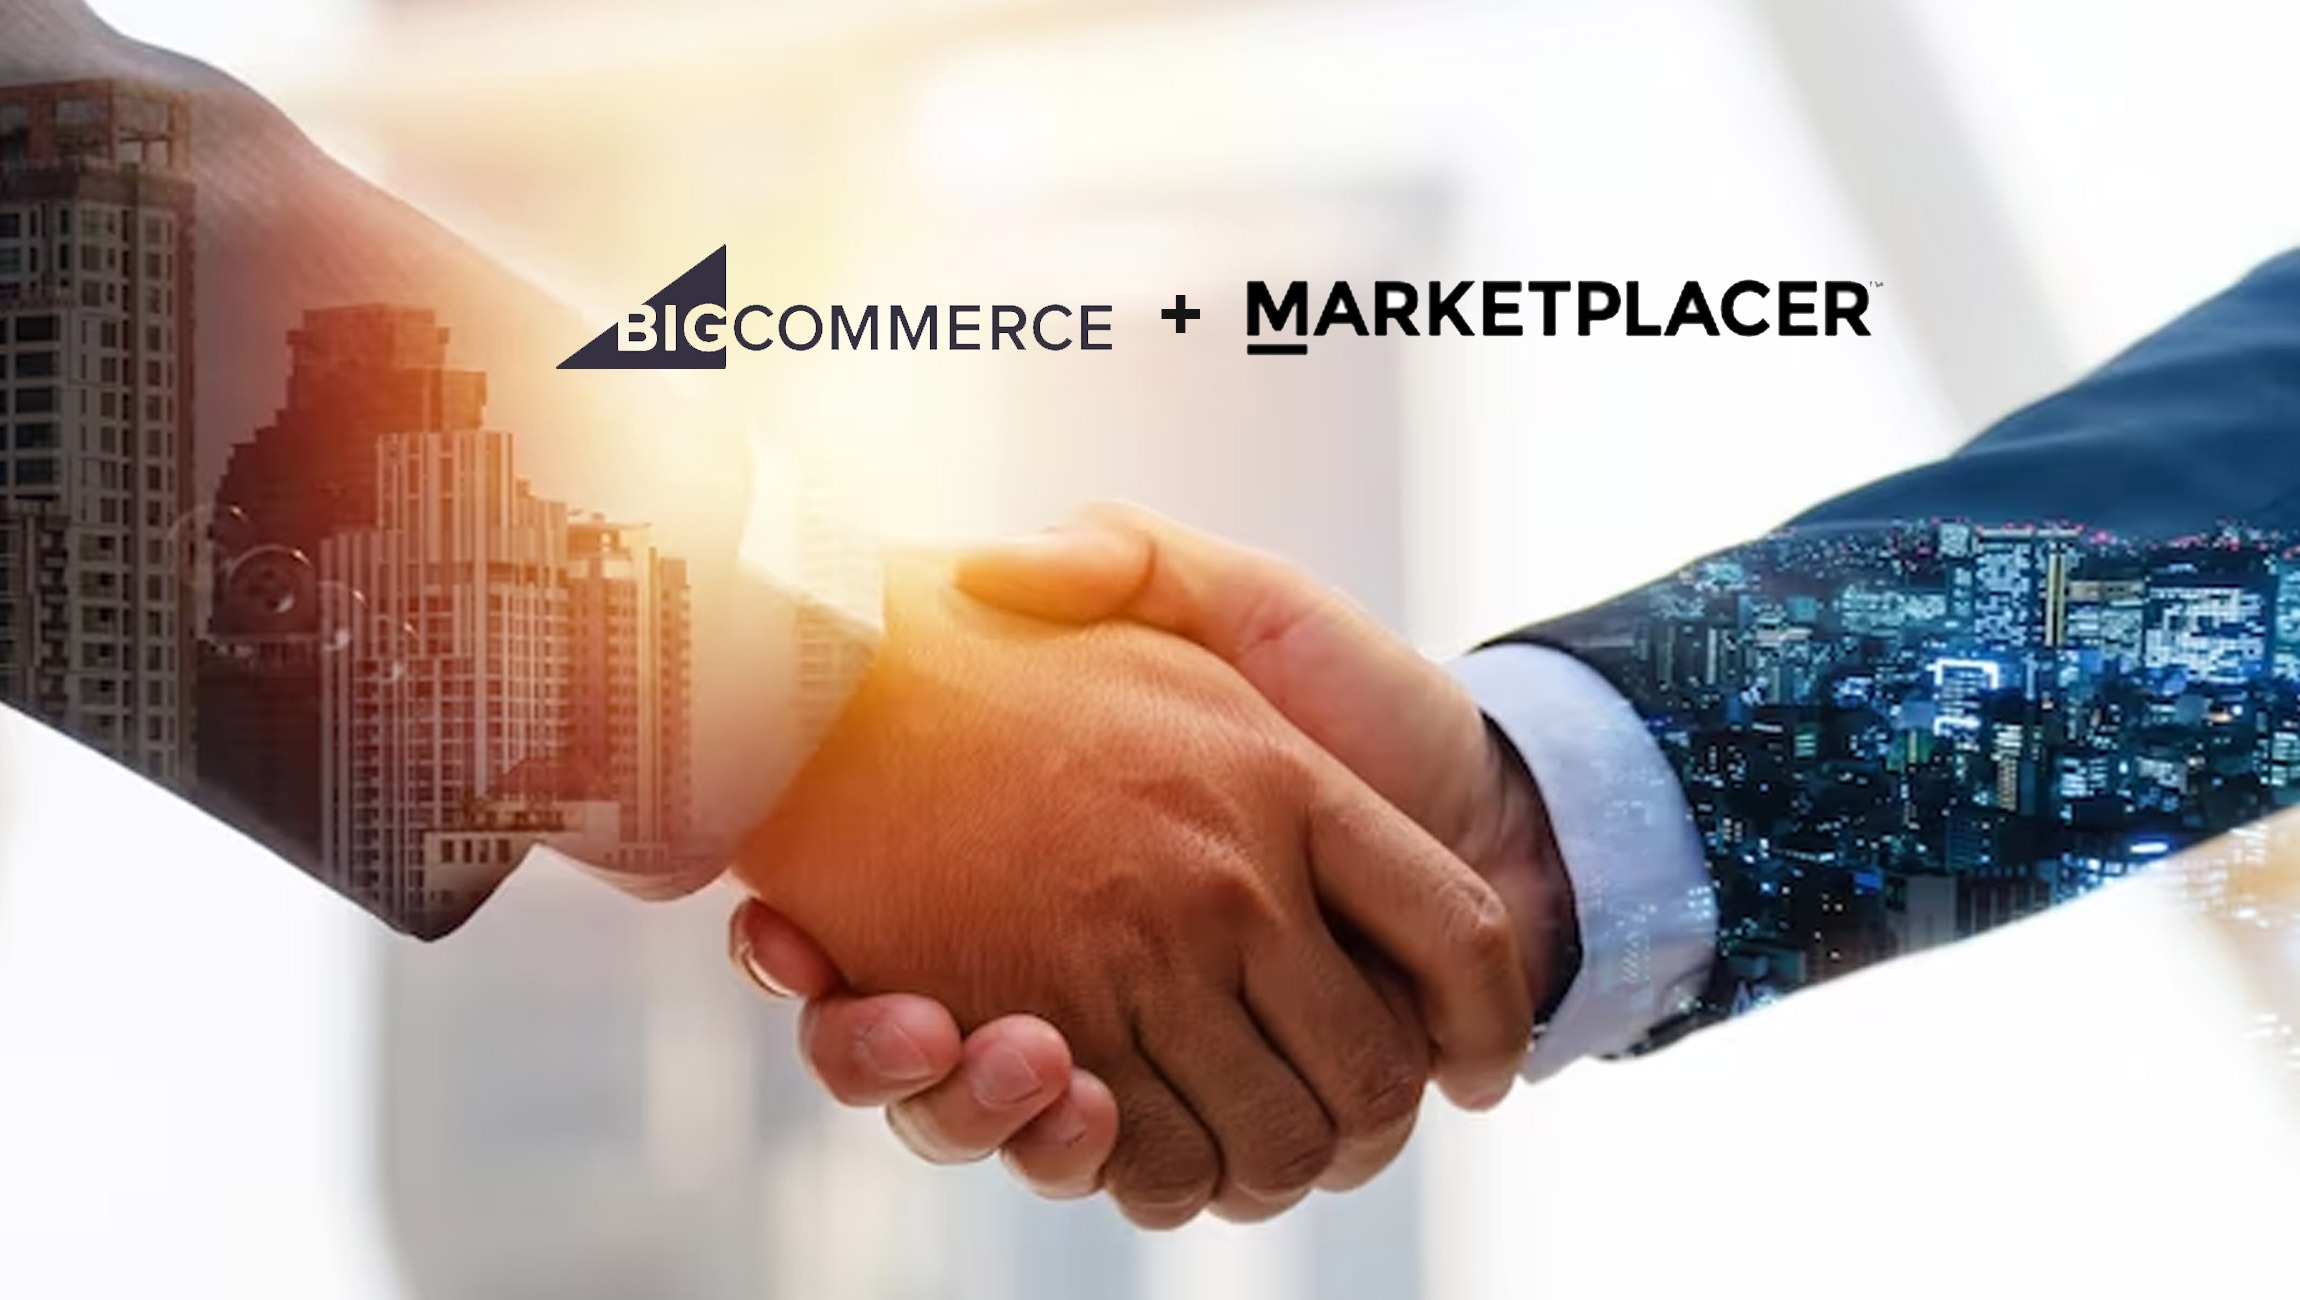 BigCommerce-and-Marketplacer-Announce-Strategic-Partnership-to-Help-Retailers-Accelerate-Growth